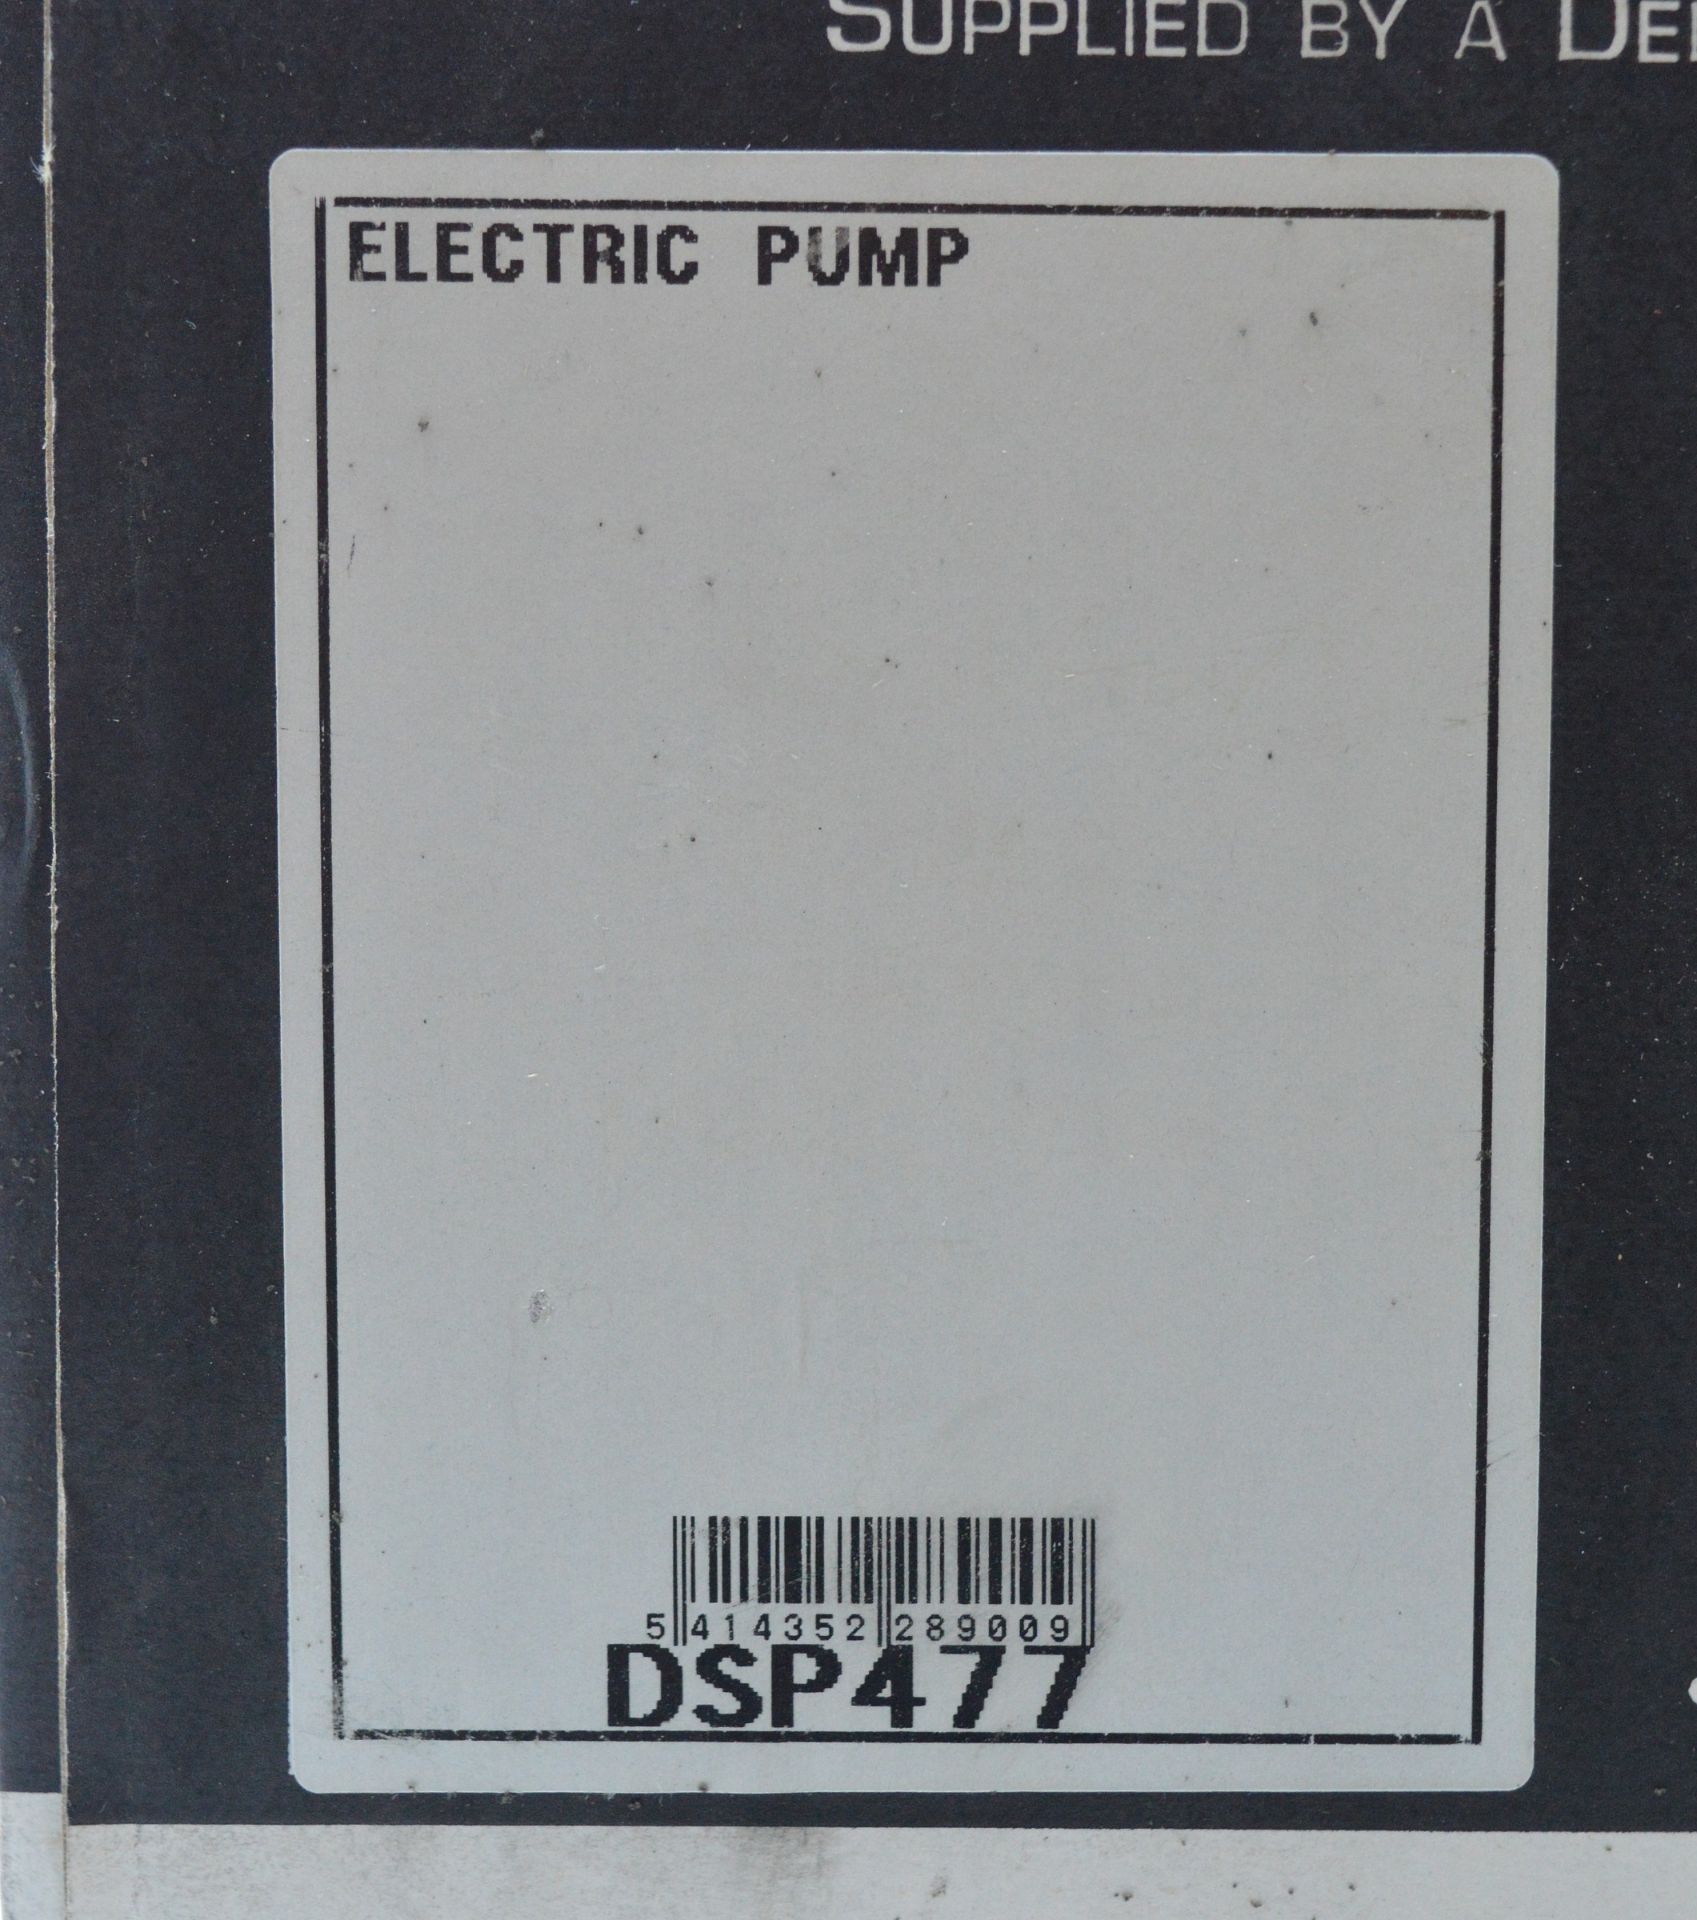 Delco Remy Electric Pump DSP478 - Image 2 of 3